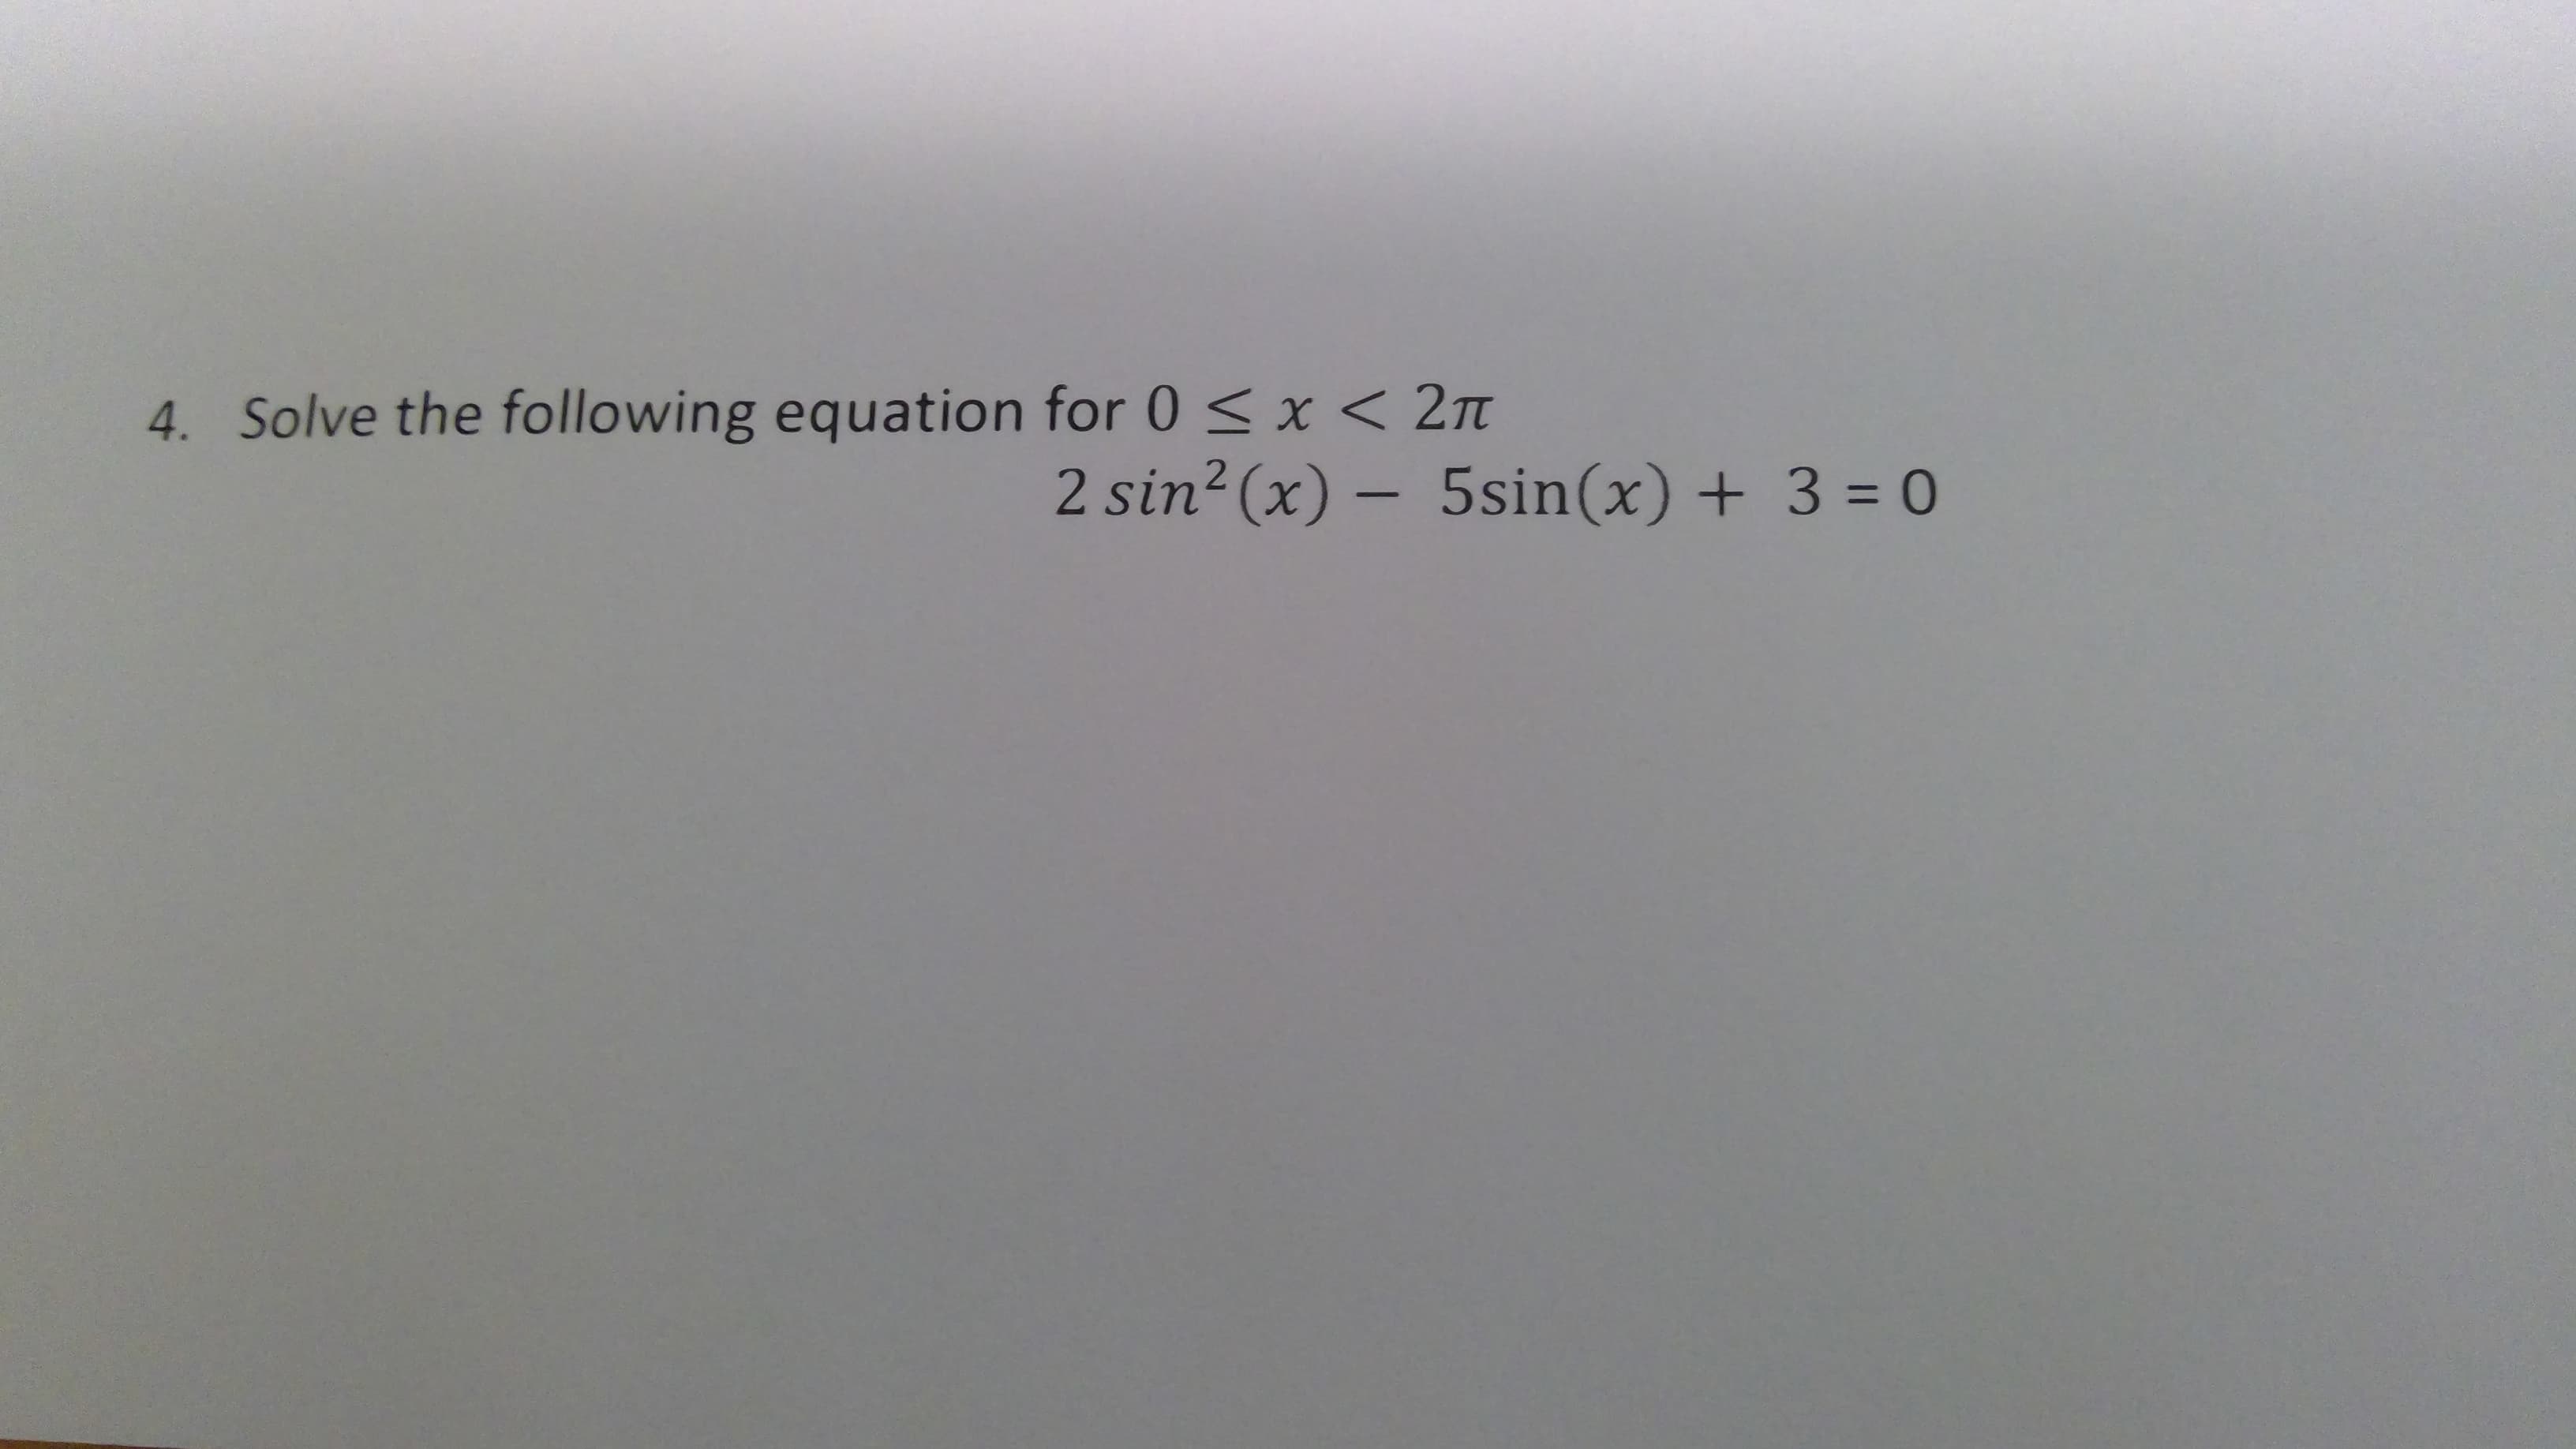 4. Solve the following equation for 0 < x < 2n
2 sin2 (x) – 5sin(x) + 3 = 0
